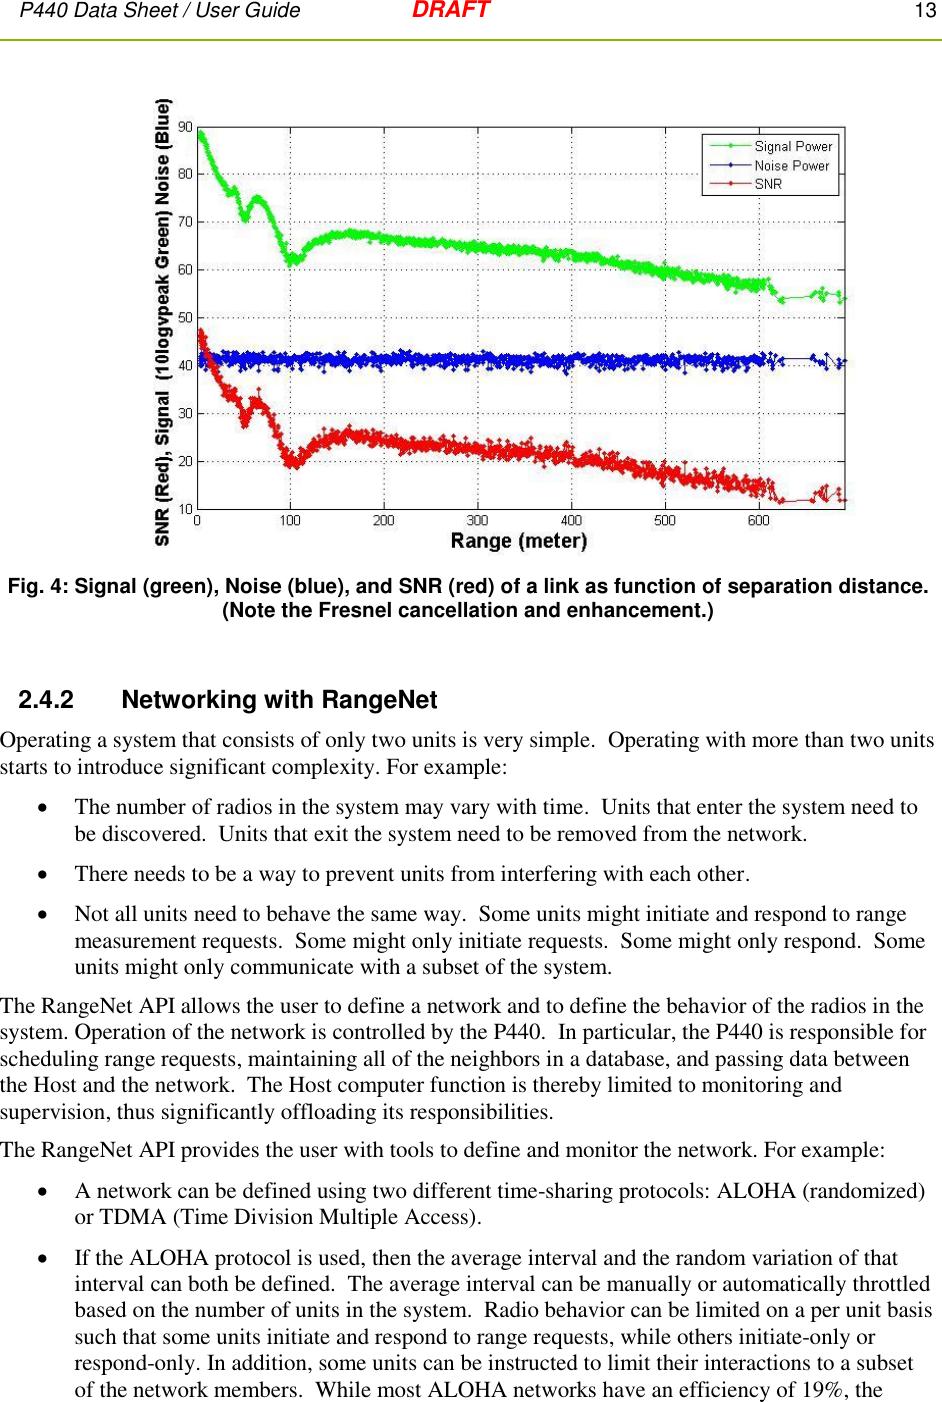 P440 Data Sheet / User Guide   DRAFT    13          Fig. 4: Signal (green), Noise (blue), and SNR (red) of a link as function of separation distance. (Note the Fresnel cancellation and enhancement.)  2.4.2      Networking with RangeNet  Operating a system that consists of only two units is very simple.  Operating with more than two units starts to introduce significant complexity. For example:  The number of radios in the system may vary with time.  Units that enter the system need to be discovered.  Units that exit the system need to be removed from the network.  There needs to be a way to prevent units from interfering with each other.  Not all units need to behave the same way.  Some units might initiate and respond to range measurement requests.  Some might only initiate requests.  Some might only respond.  Some units might only communicate with a subset of the system. The RangeNet API allows the user to define a network and to define the behavior of the radios in the system. Operation of the network is controlled by the P440.  In particular, the P440 is responsible for scheduling range requests, maintaining all of the neighbors in a database, and passing data between the Host and the network.  The Host computer function is thereby limited to monitoring and supervision, thus significantly offloading its responsibilities. The RangeNet API provides the user with tools to define and monitor the network. For example:   A network can be defined using two different time-sharing protocols: ALOHA (randomized) or TDMA (Time Division Multiple Access).  If the ALOHA protocol is used, then the average interval and the random variation of that interval can both be defined.  The average interval can be manually or automatically throttled based on the number of units in the system.  Radio behavior can be limited on a per unit basis such that some units initiate and respond to range requests, while others initiate-only or respond-only. In addition, some units can be instructed to limit their interactions to a subset of the network members.  While most ALOHA networks have an efficiency of 19%, the 